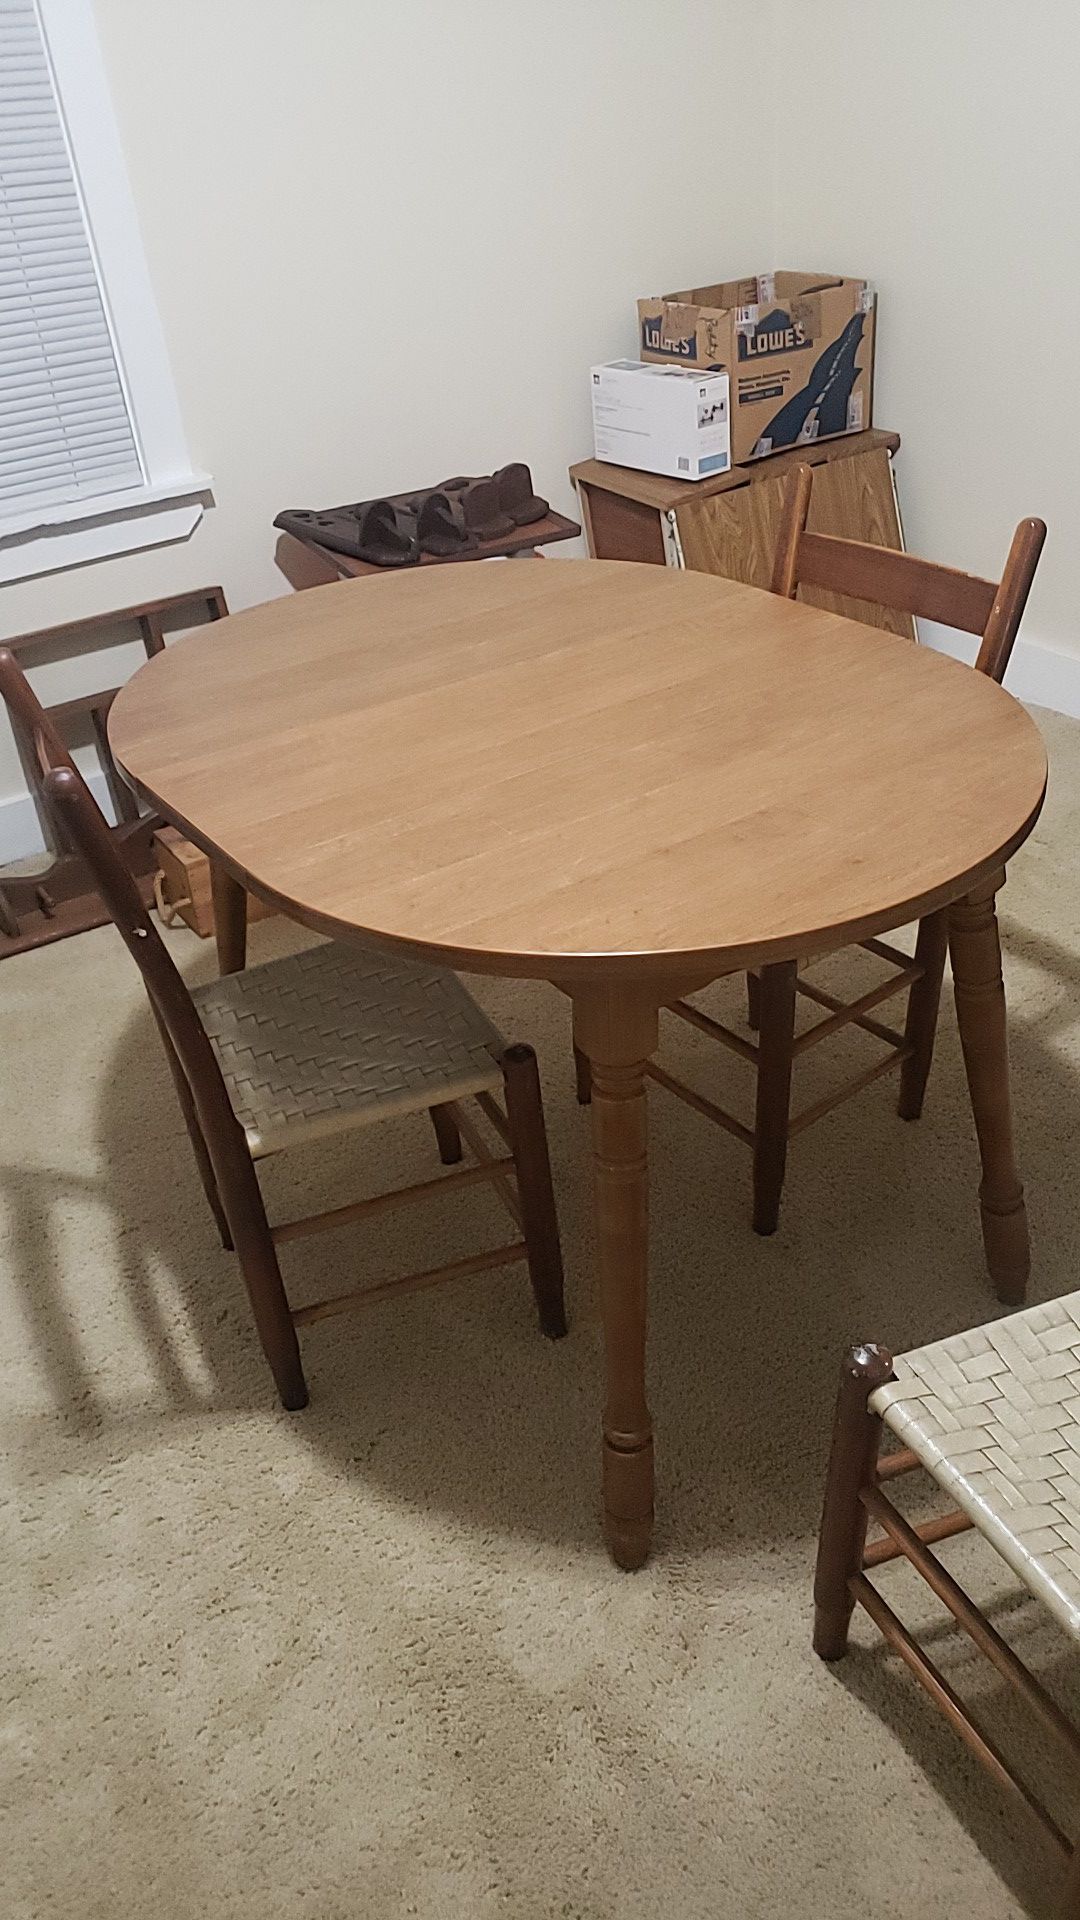 Kitchen table 3 chairs